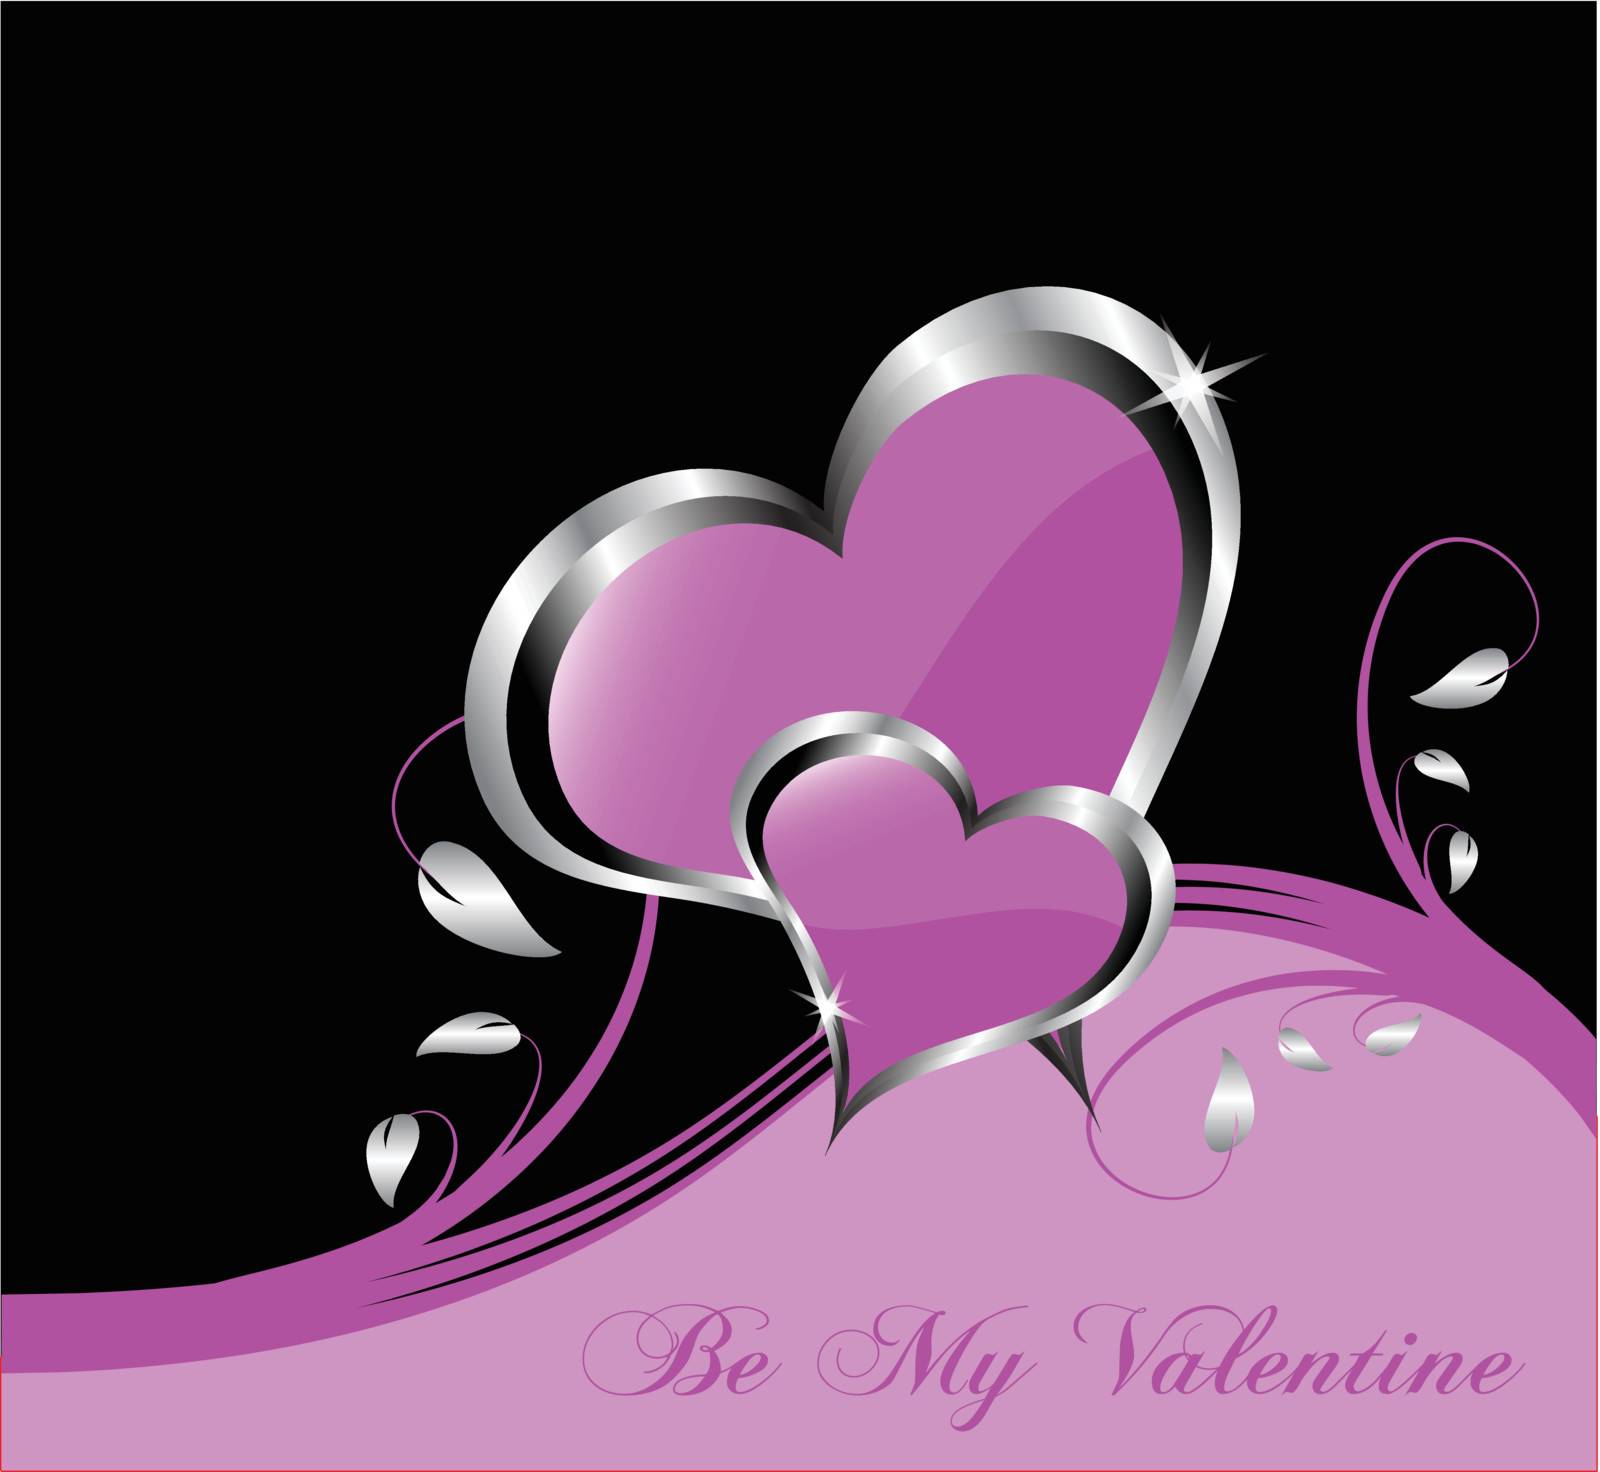 A vector valentines background  a large central hearts on a mauve background